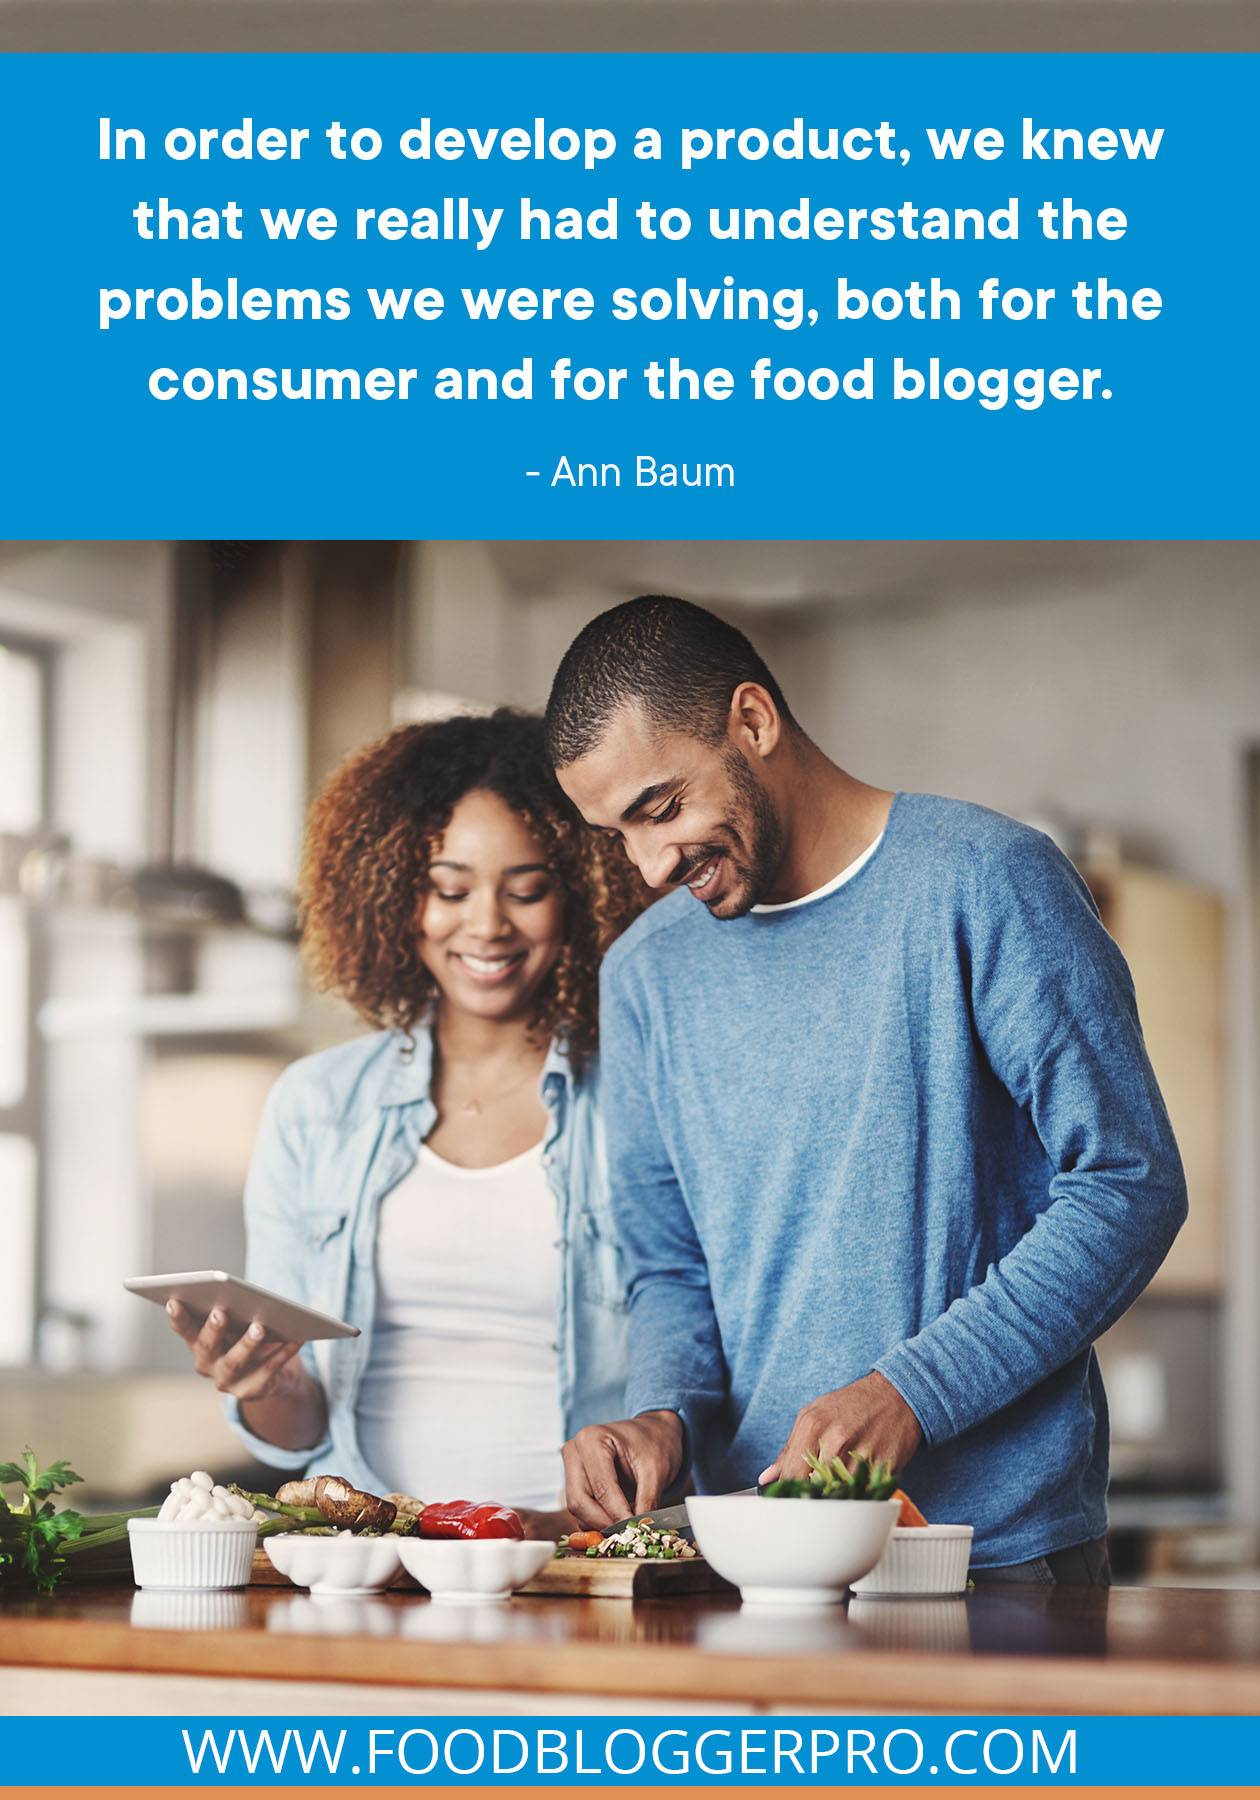 A photograph of two people cooking together with a quote from Ann Baum's episode of The Food Blogger Pro Podcast, "In order to develop a product, we knew that we really had to understand the problems we were solving, both for the consumer and for the food blogger."